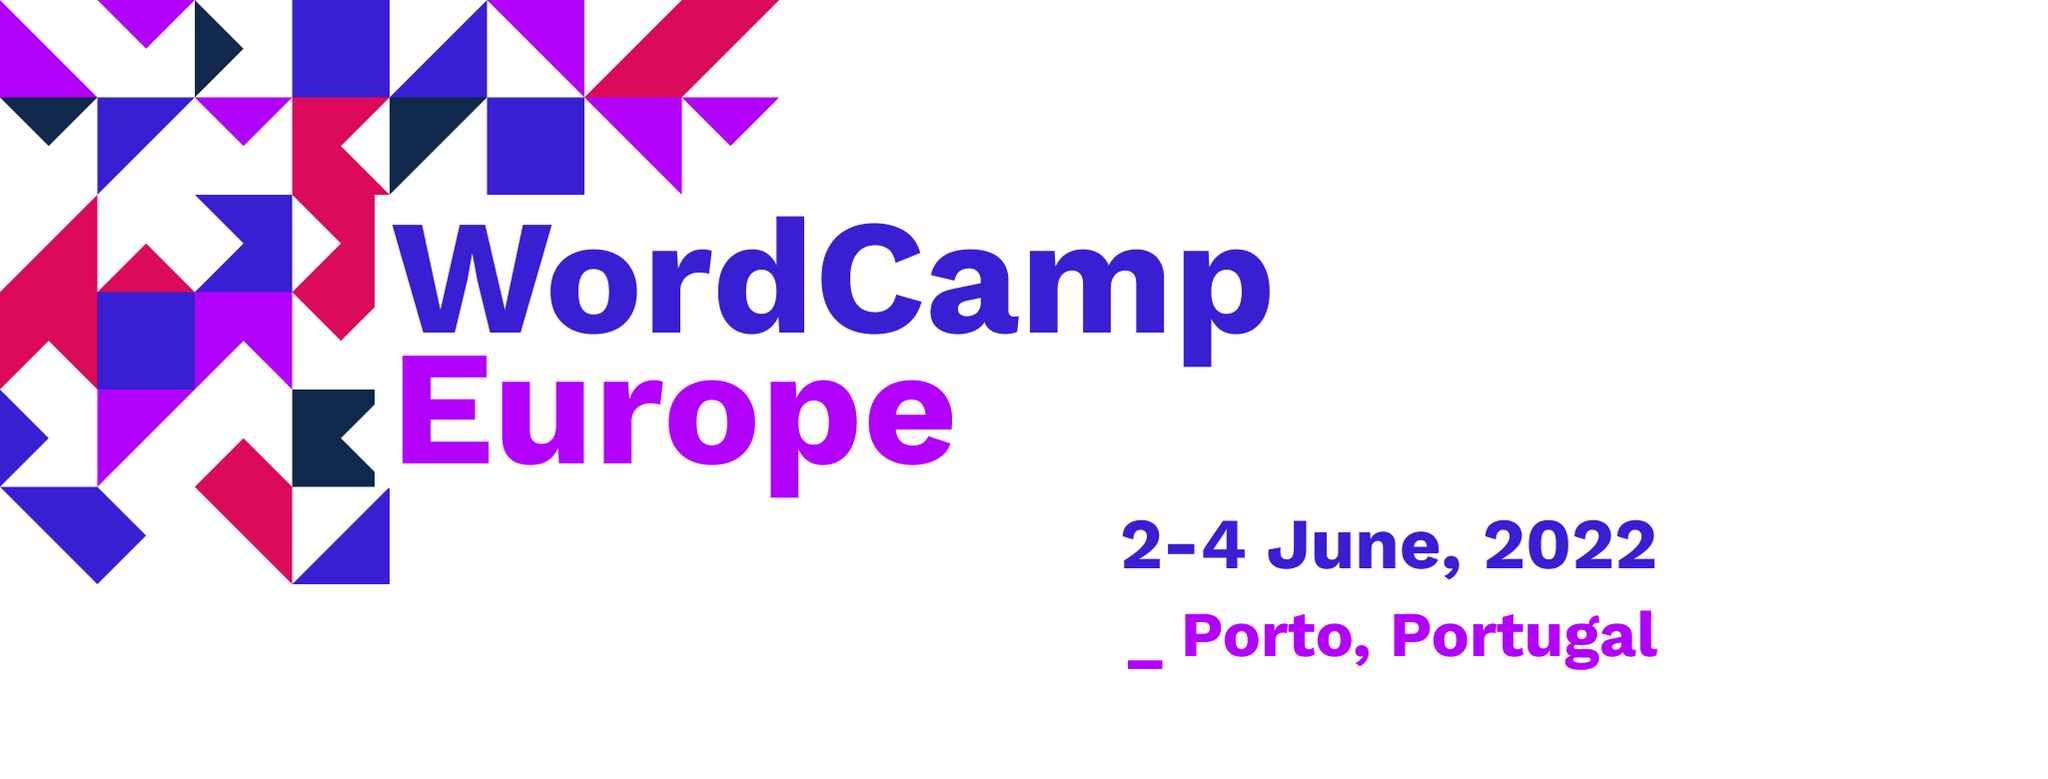 9 Things I Learned from WordCamp Europe 2022